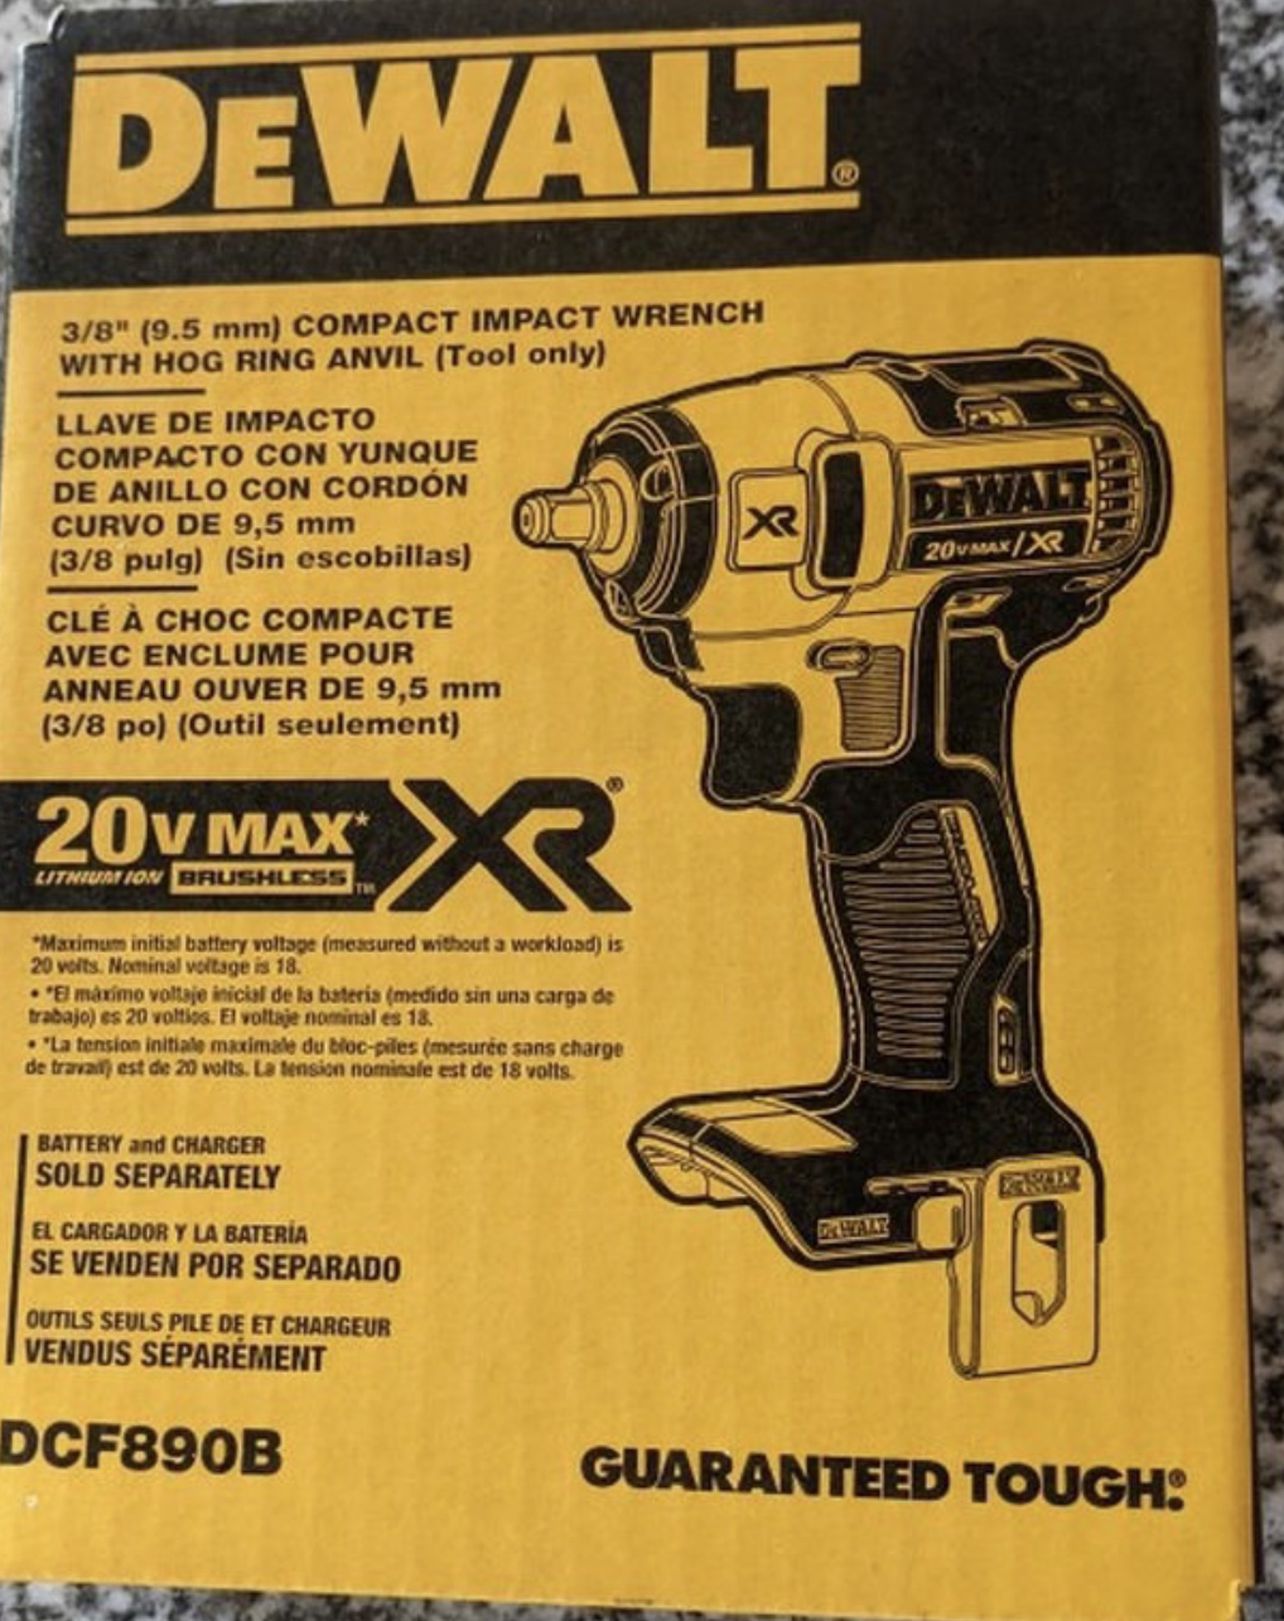 Brand New Dewalt Compact Impact Wrench. Tool Only. DCF890B. $199 Retail.